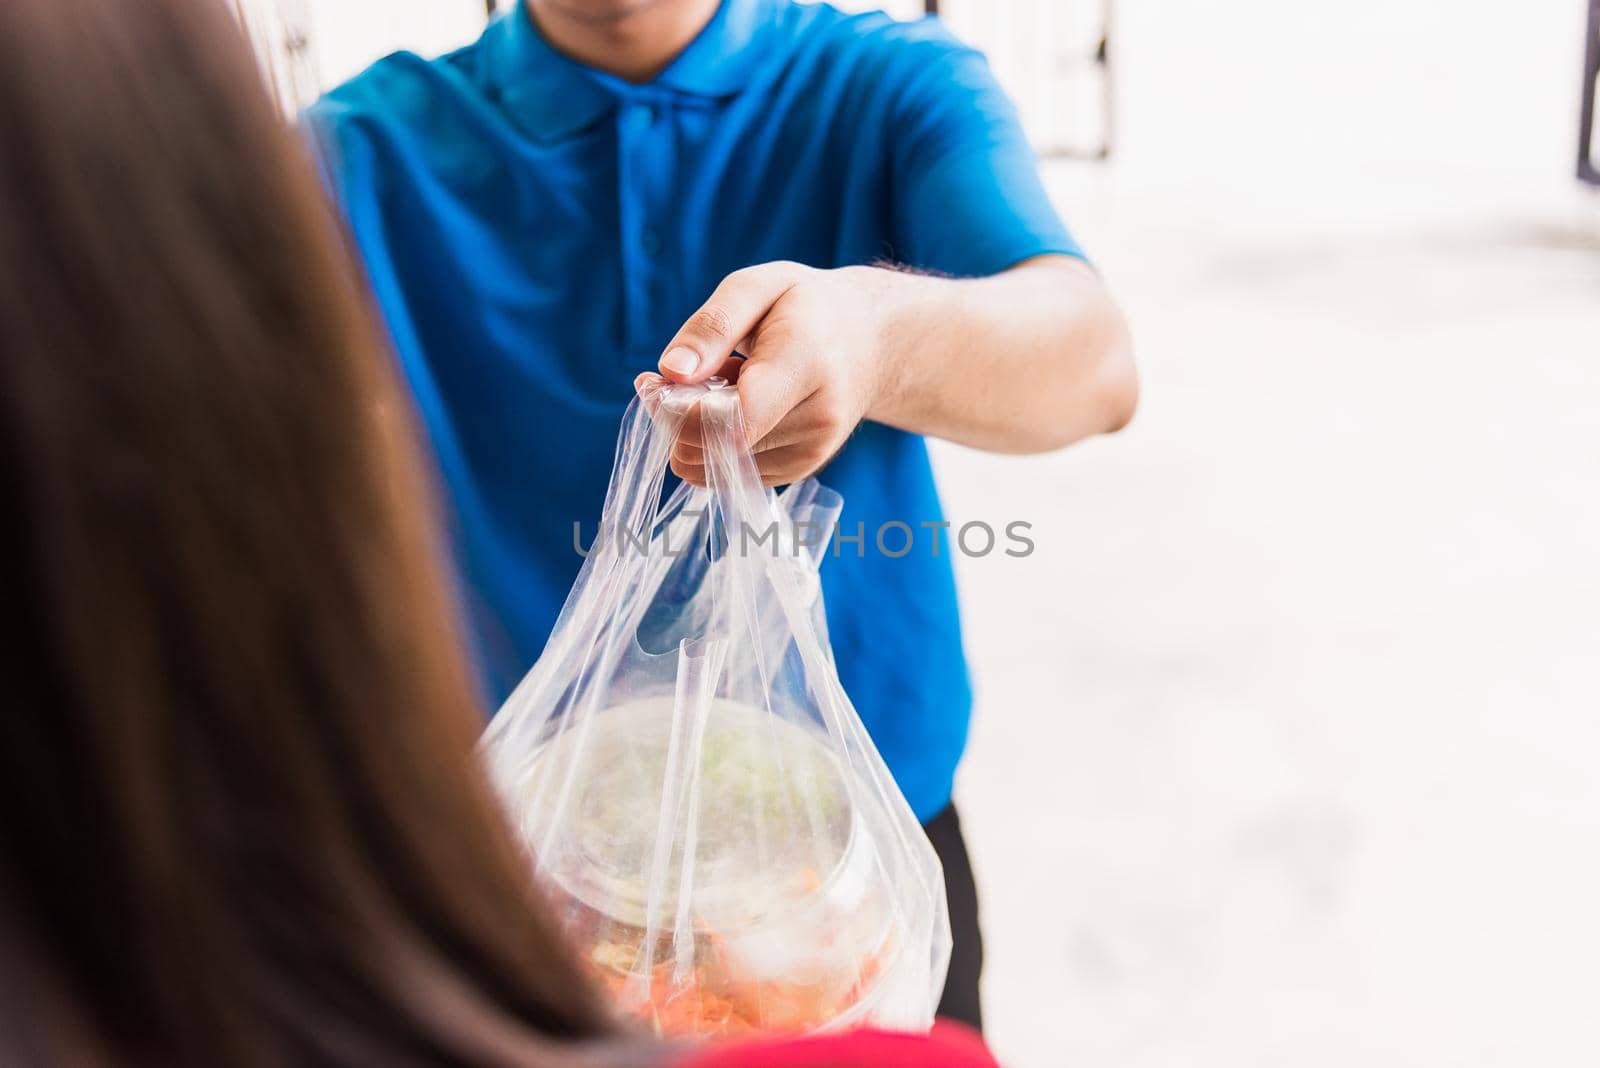 Delivery man making grocery service giving rice food boxes plastic bags to woman customer by Sorapop